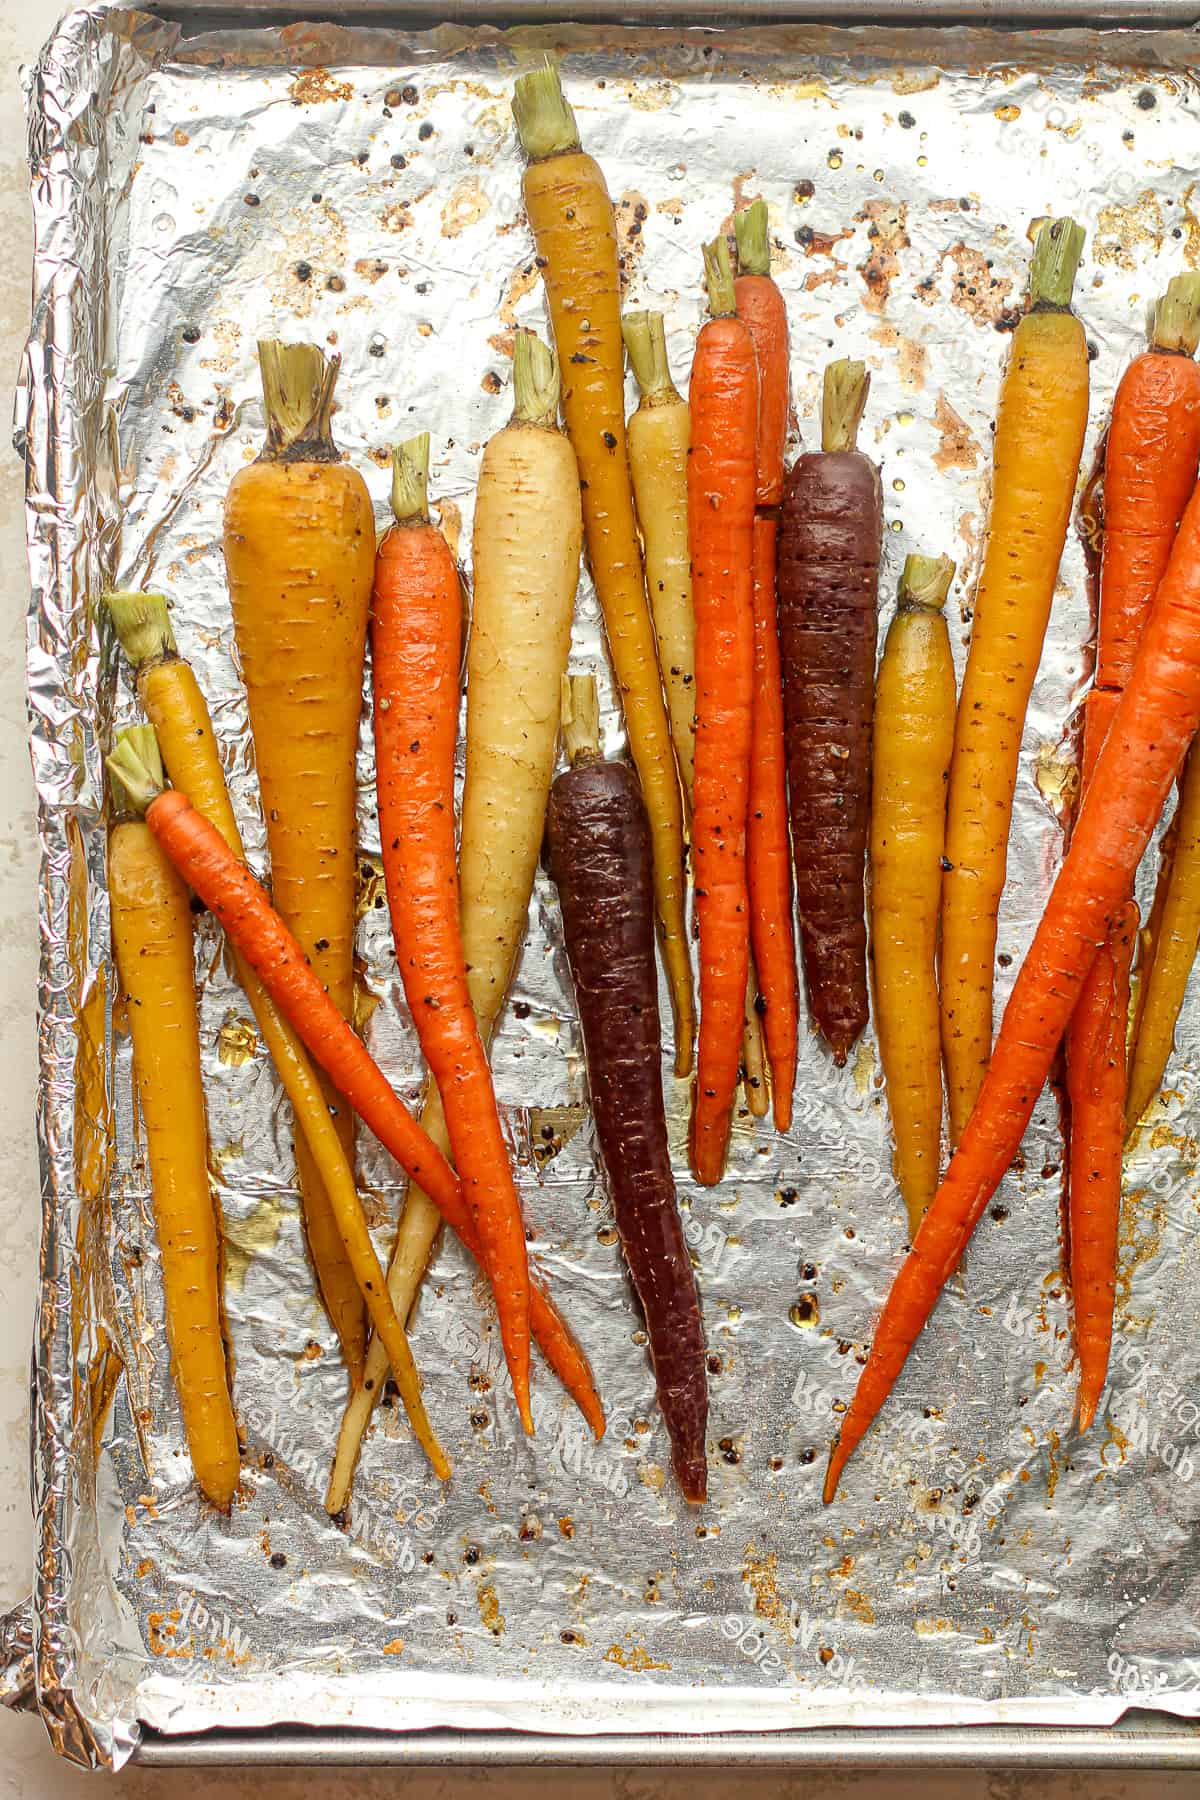 A pan lined with foil with the maple glazed carrots.